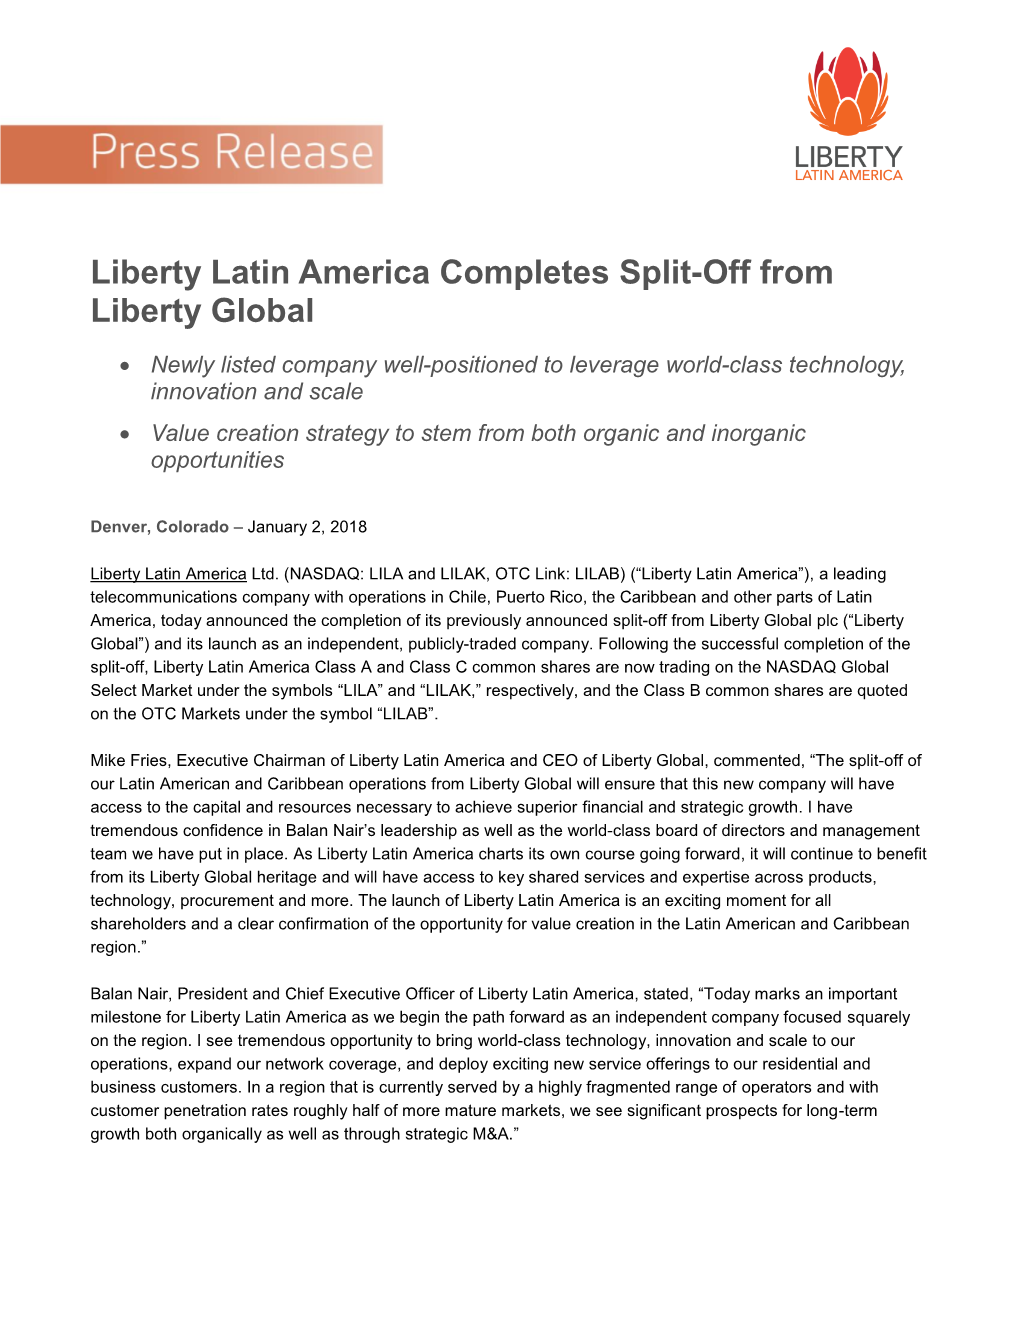 Liberty Latin America Completes Split-Off from Liberty Global